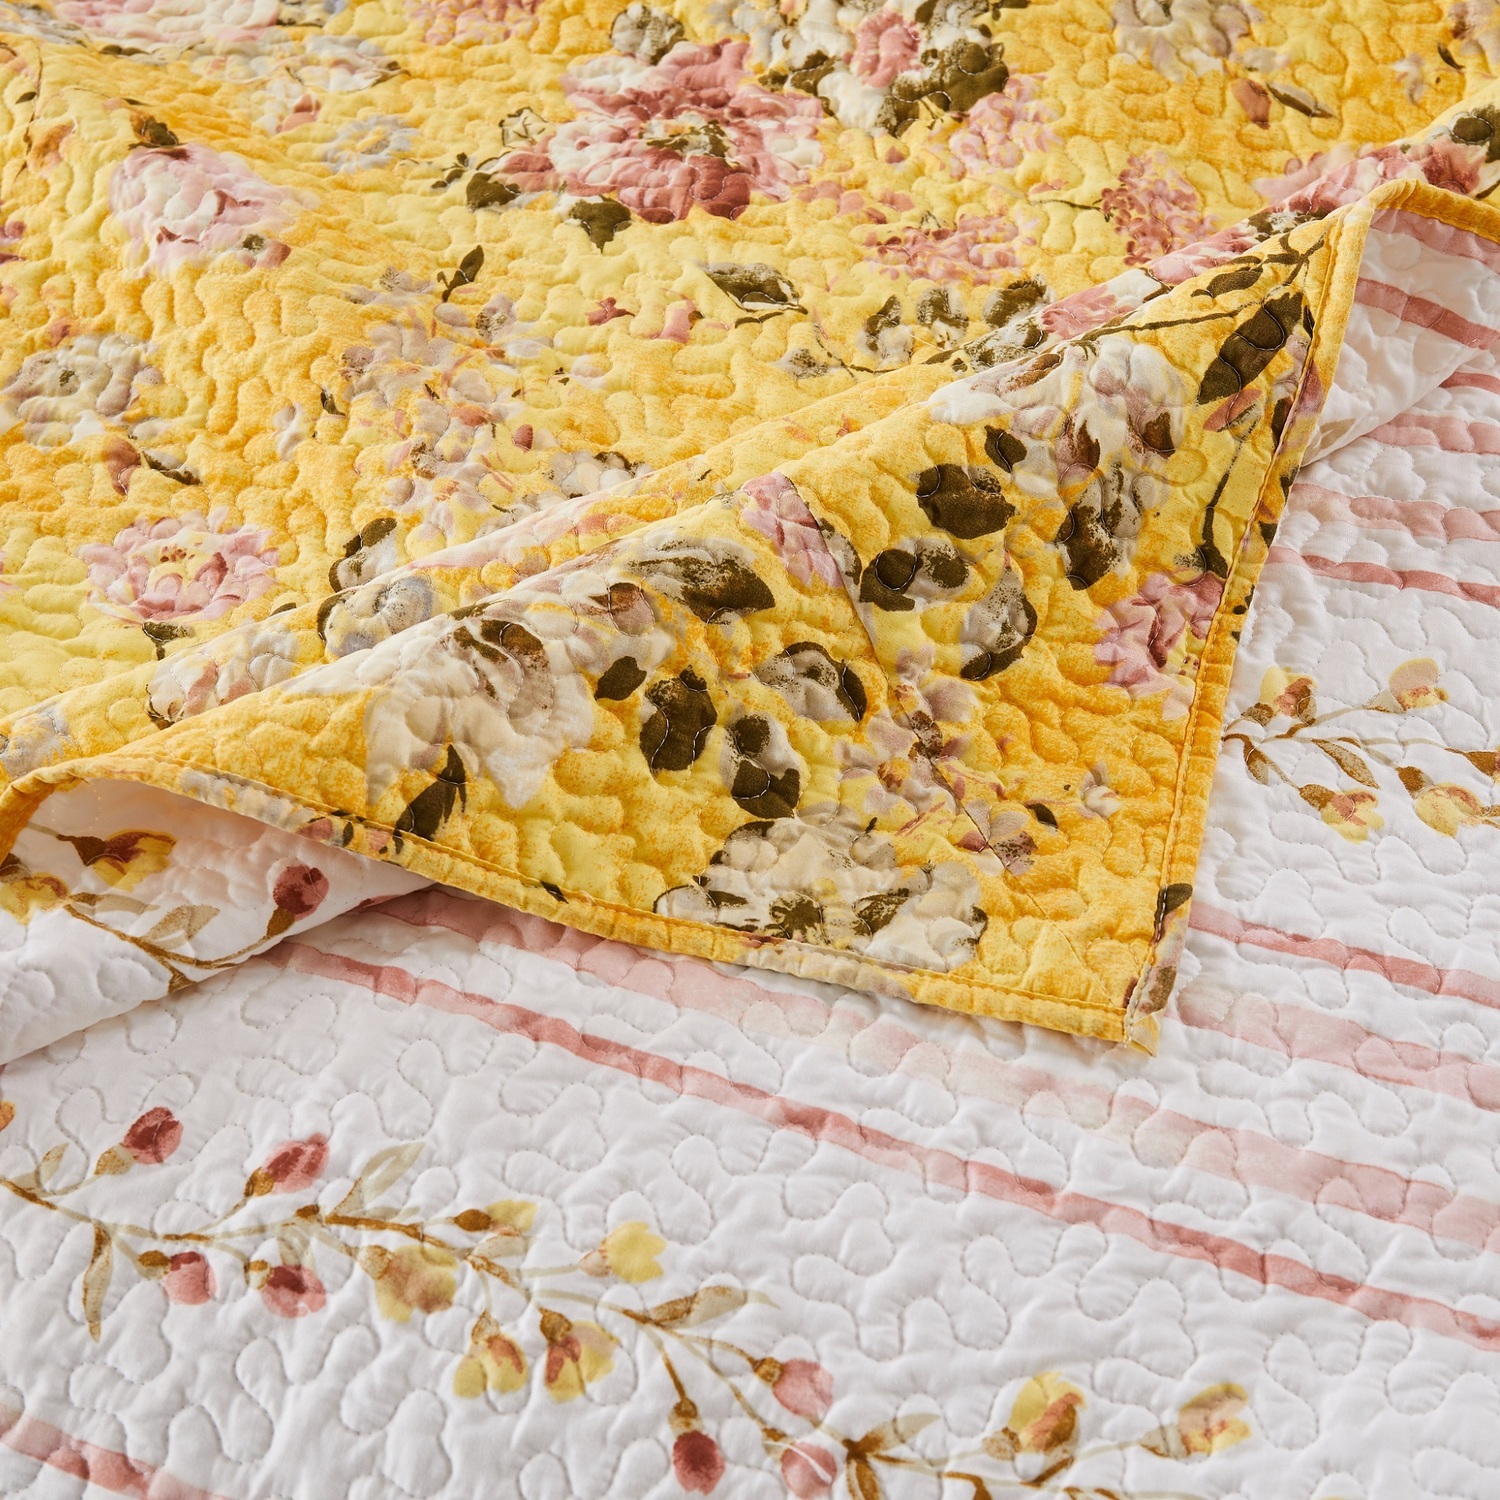 patchwork quilt bedspread Greenland Home Fashions Quilt Set Yellow